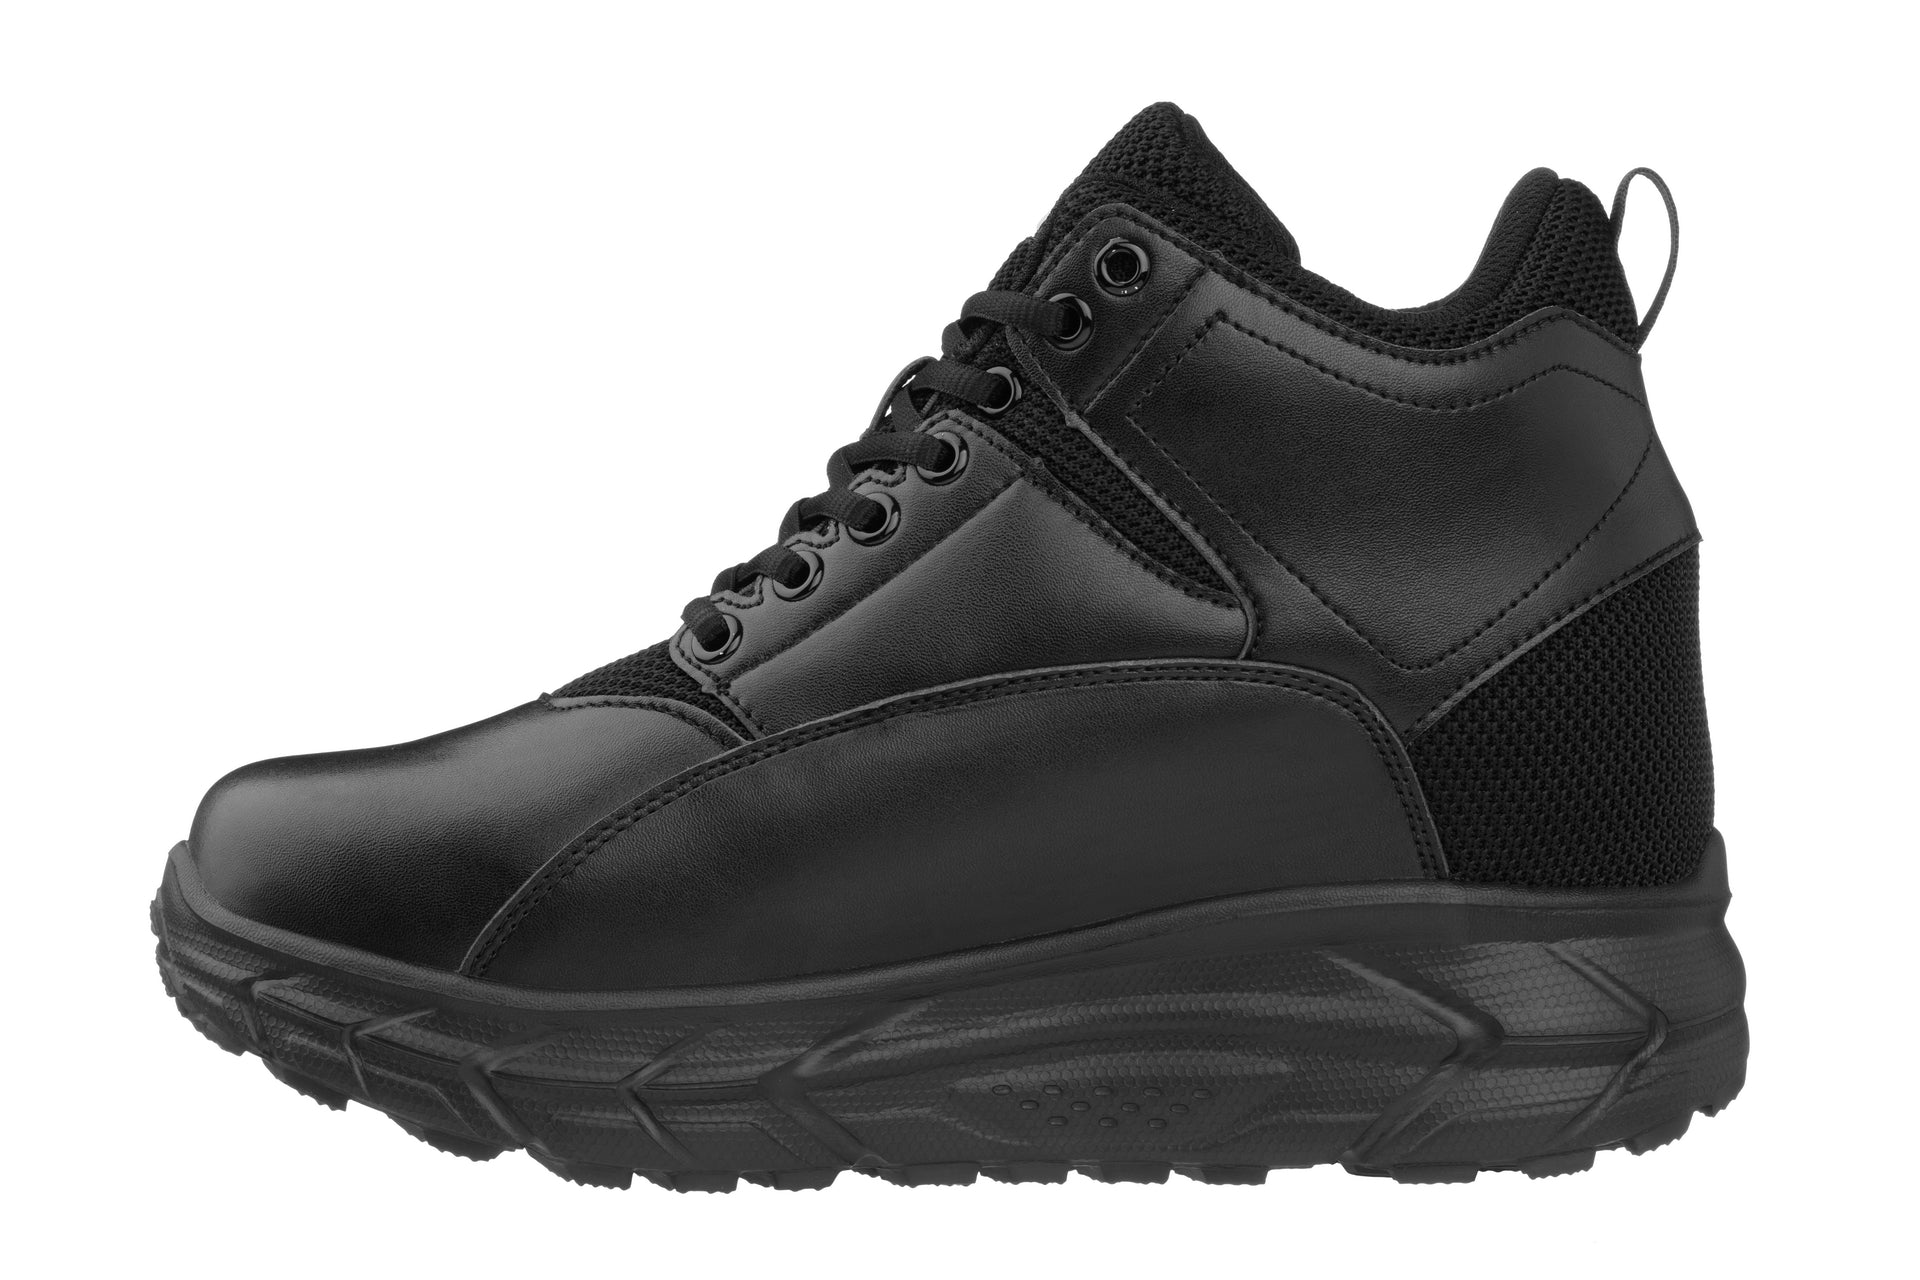 Elevator shoes height increase CALTO - S22802 - 4 Inches Taller (Black) - Hiking Style Boots